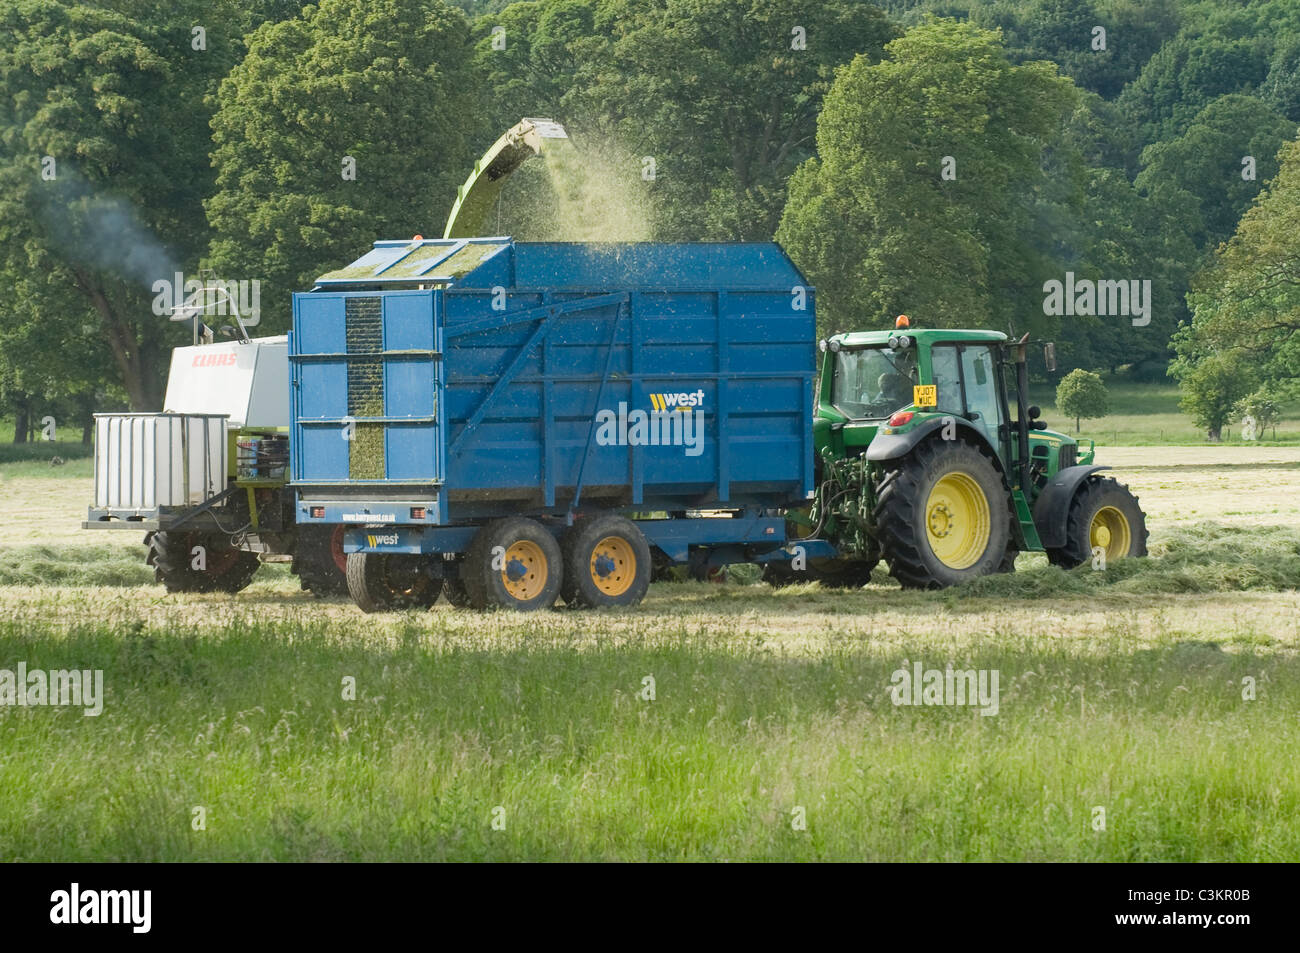 1 John Deere tractor & trailer working in farm field, driving alongside Claas forage harvester collecting cut grass (silage) - Yorkshire, England, UK. Stock Photo